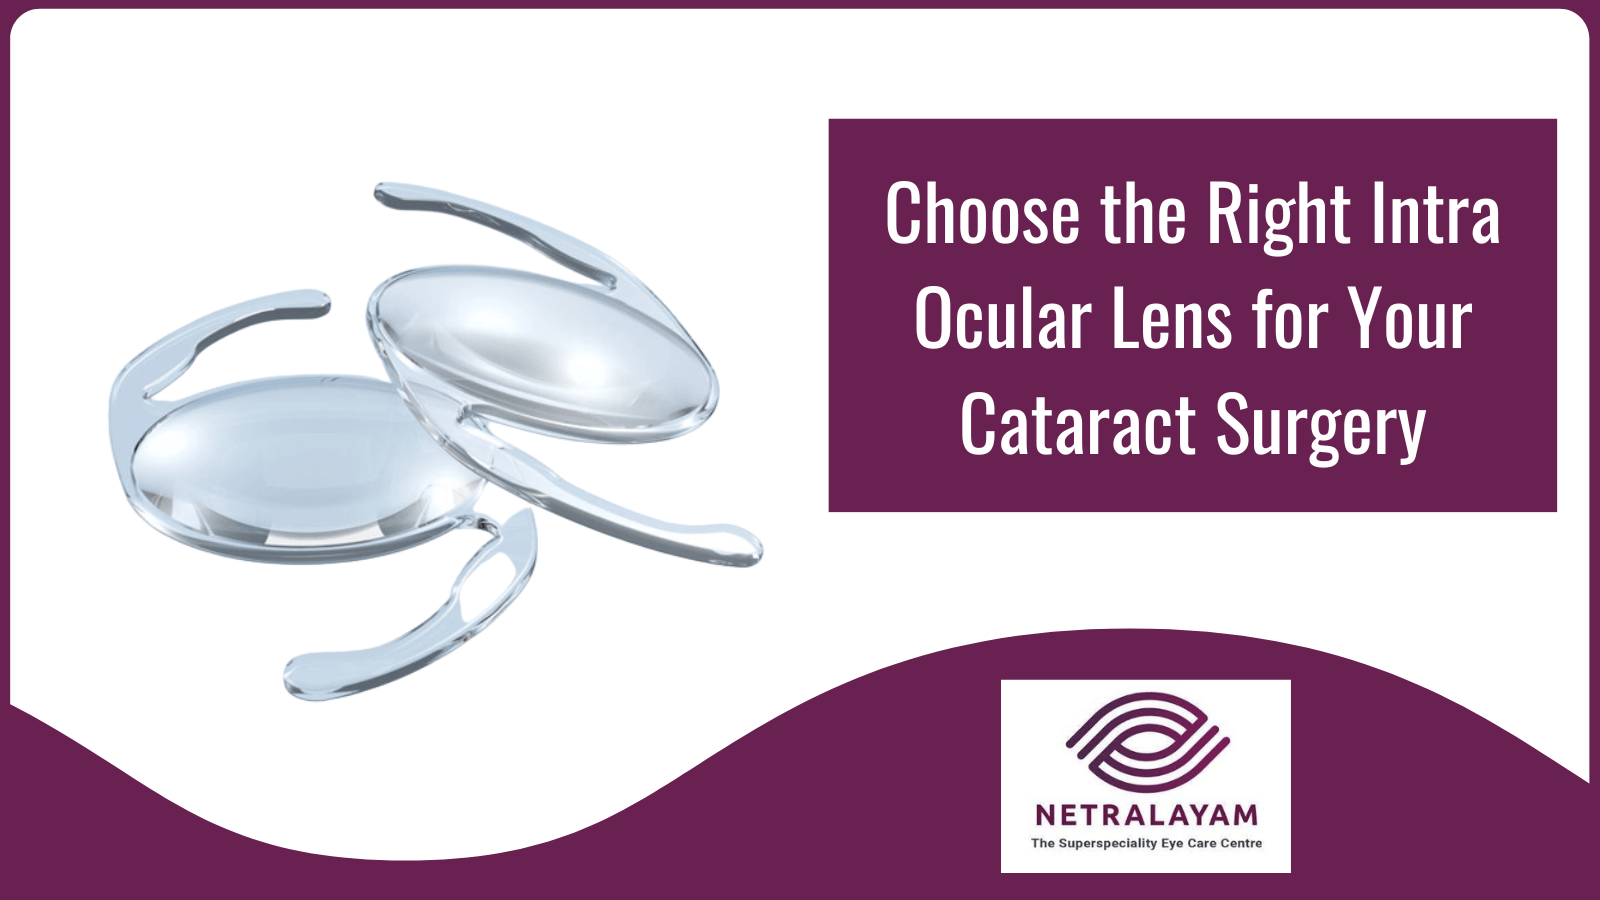 Choose the Right Intra Ocular Lens for Your Cataract Surgery